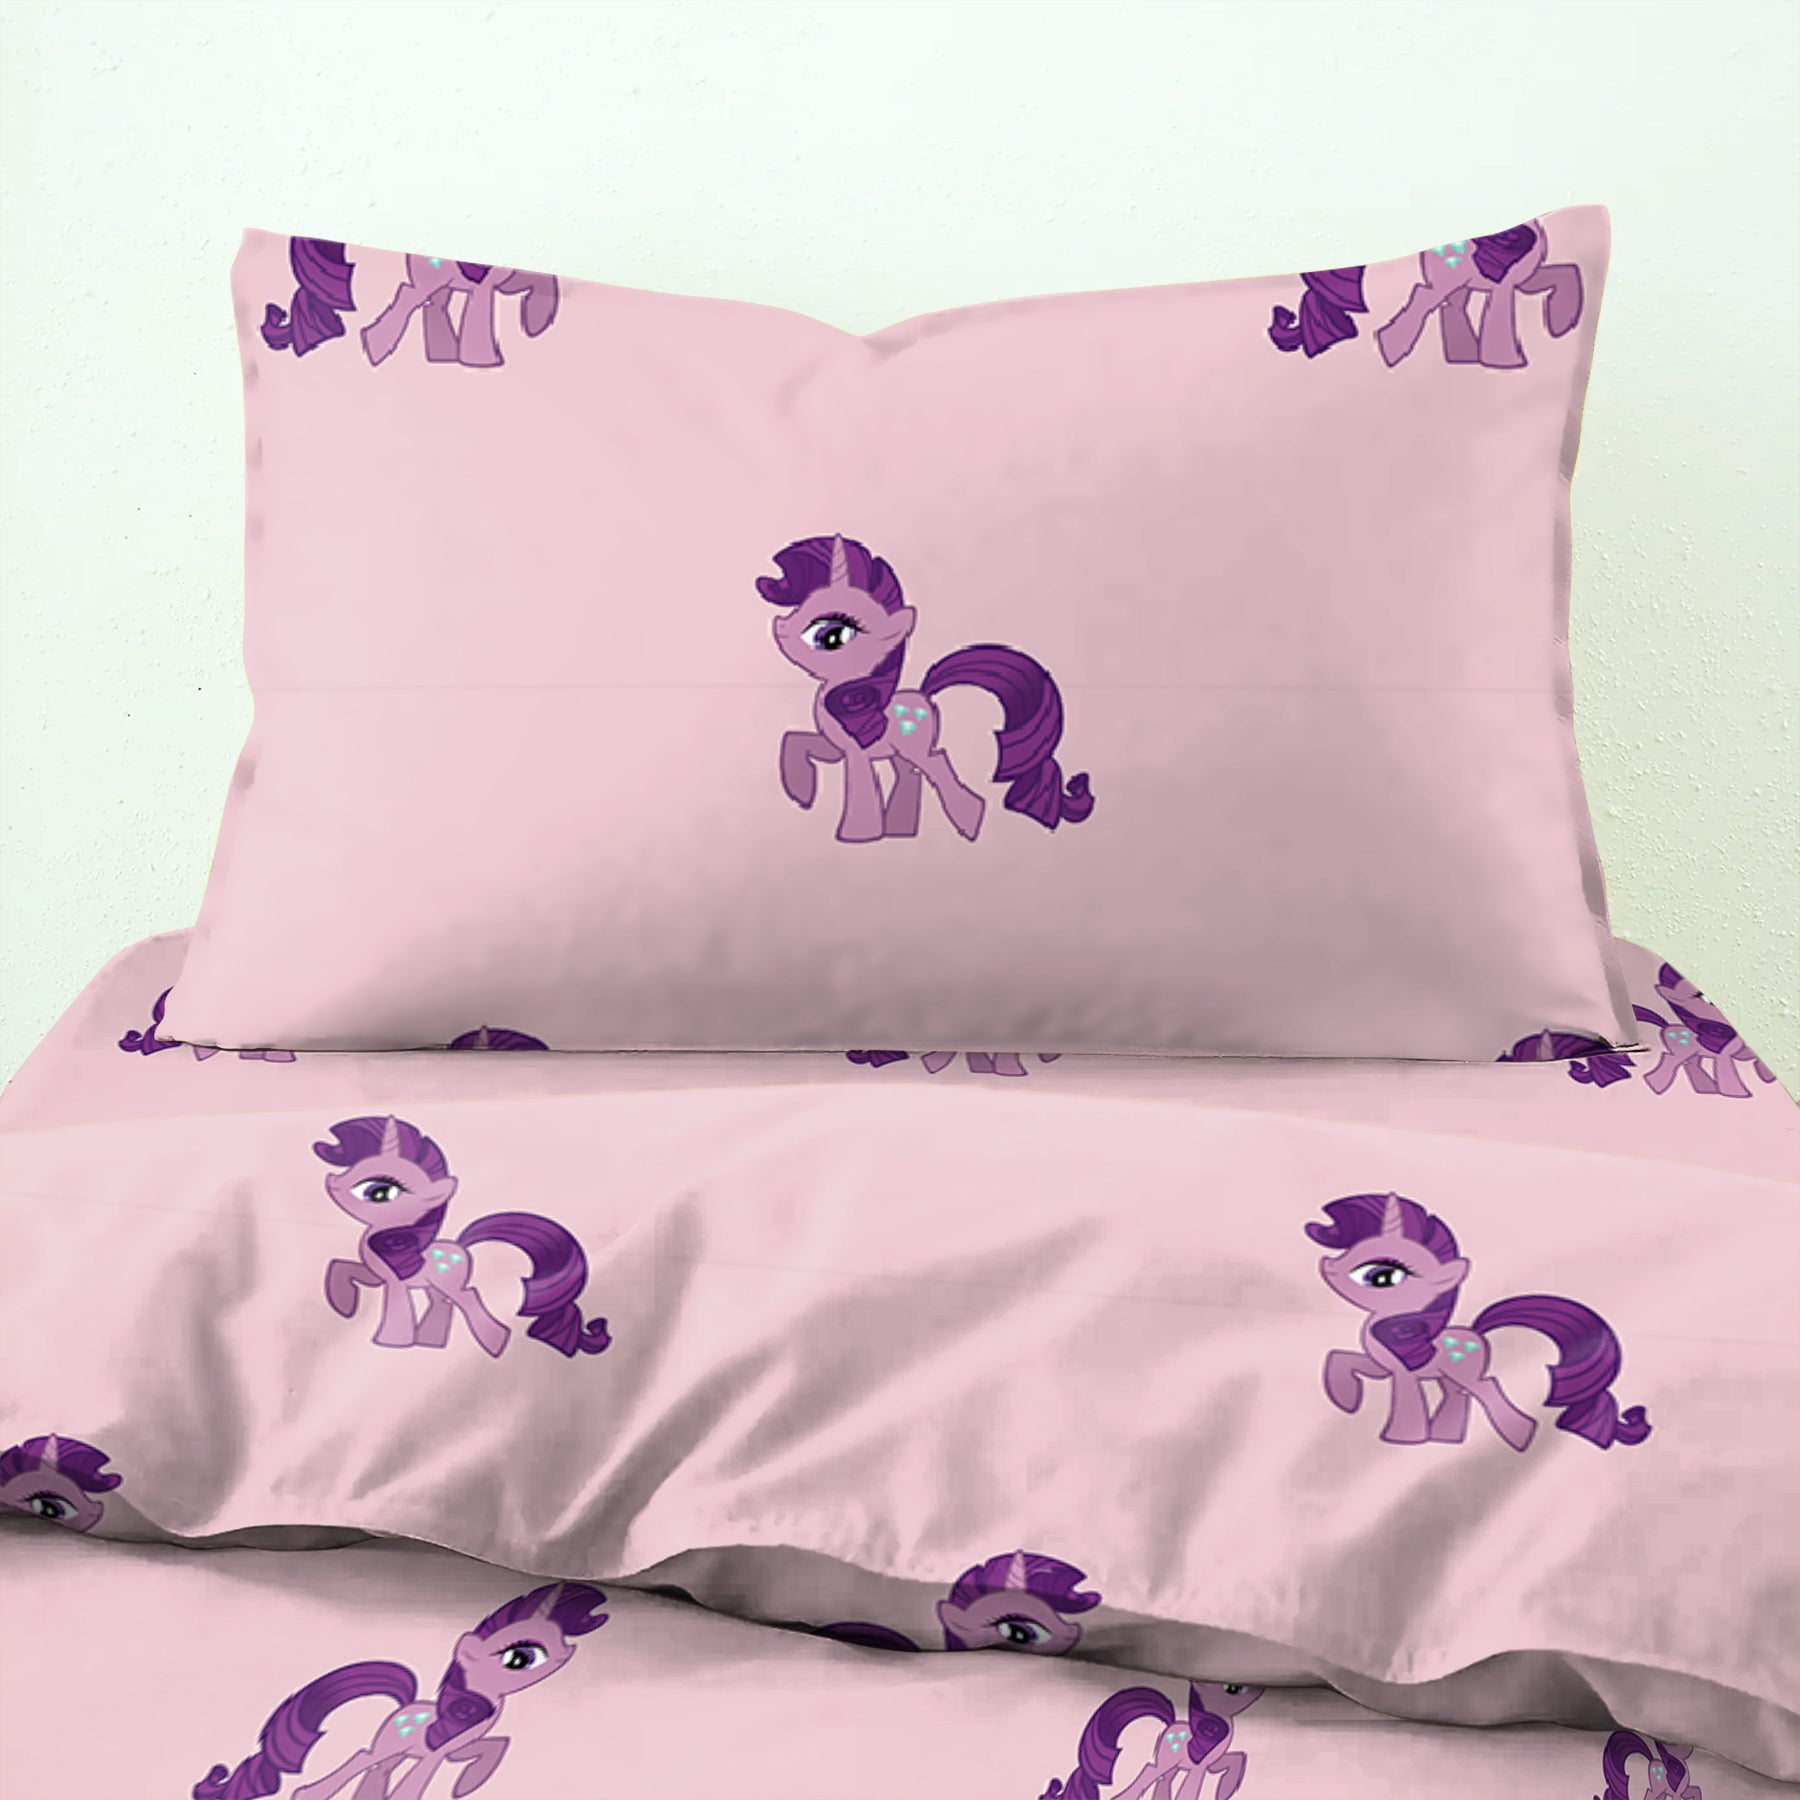 Bedcover Unicorn Rose Gold Single Bed with Pillow Covers King Size (60" X 90")